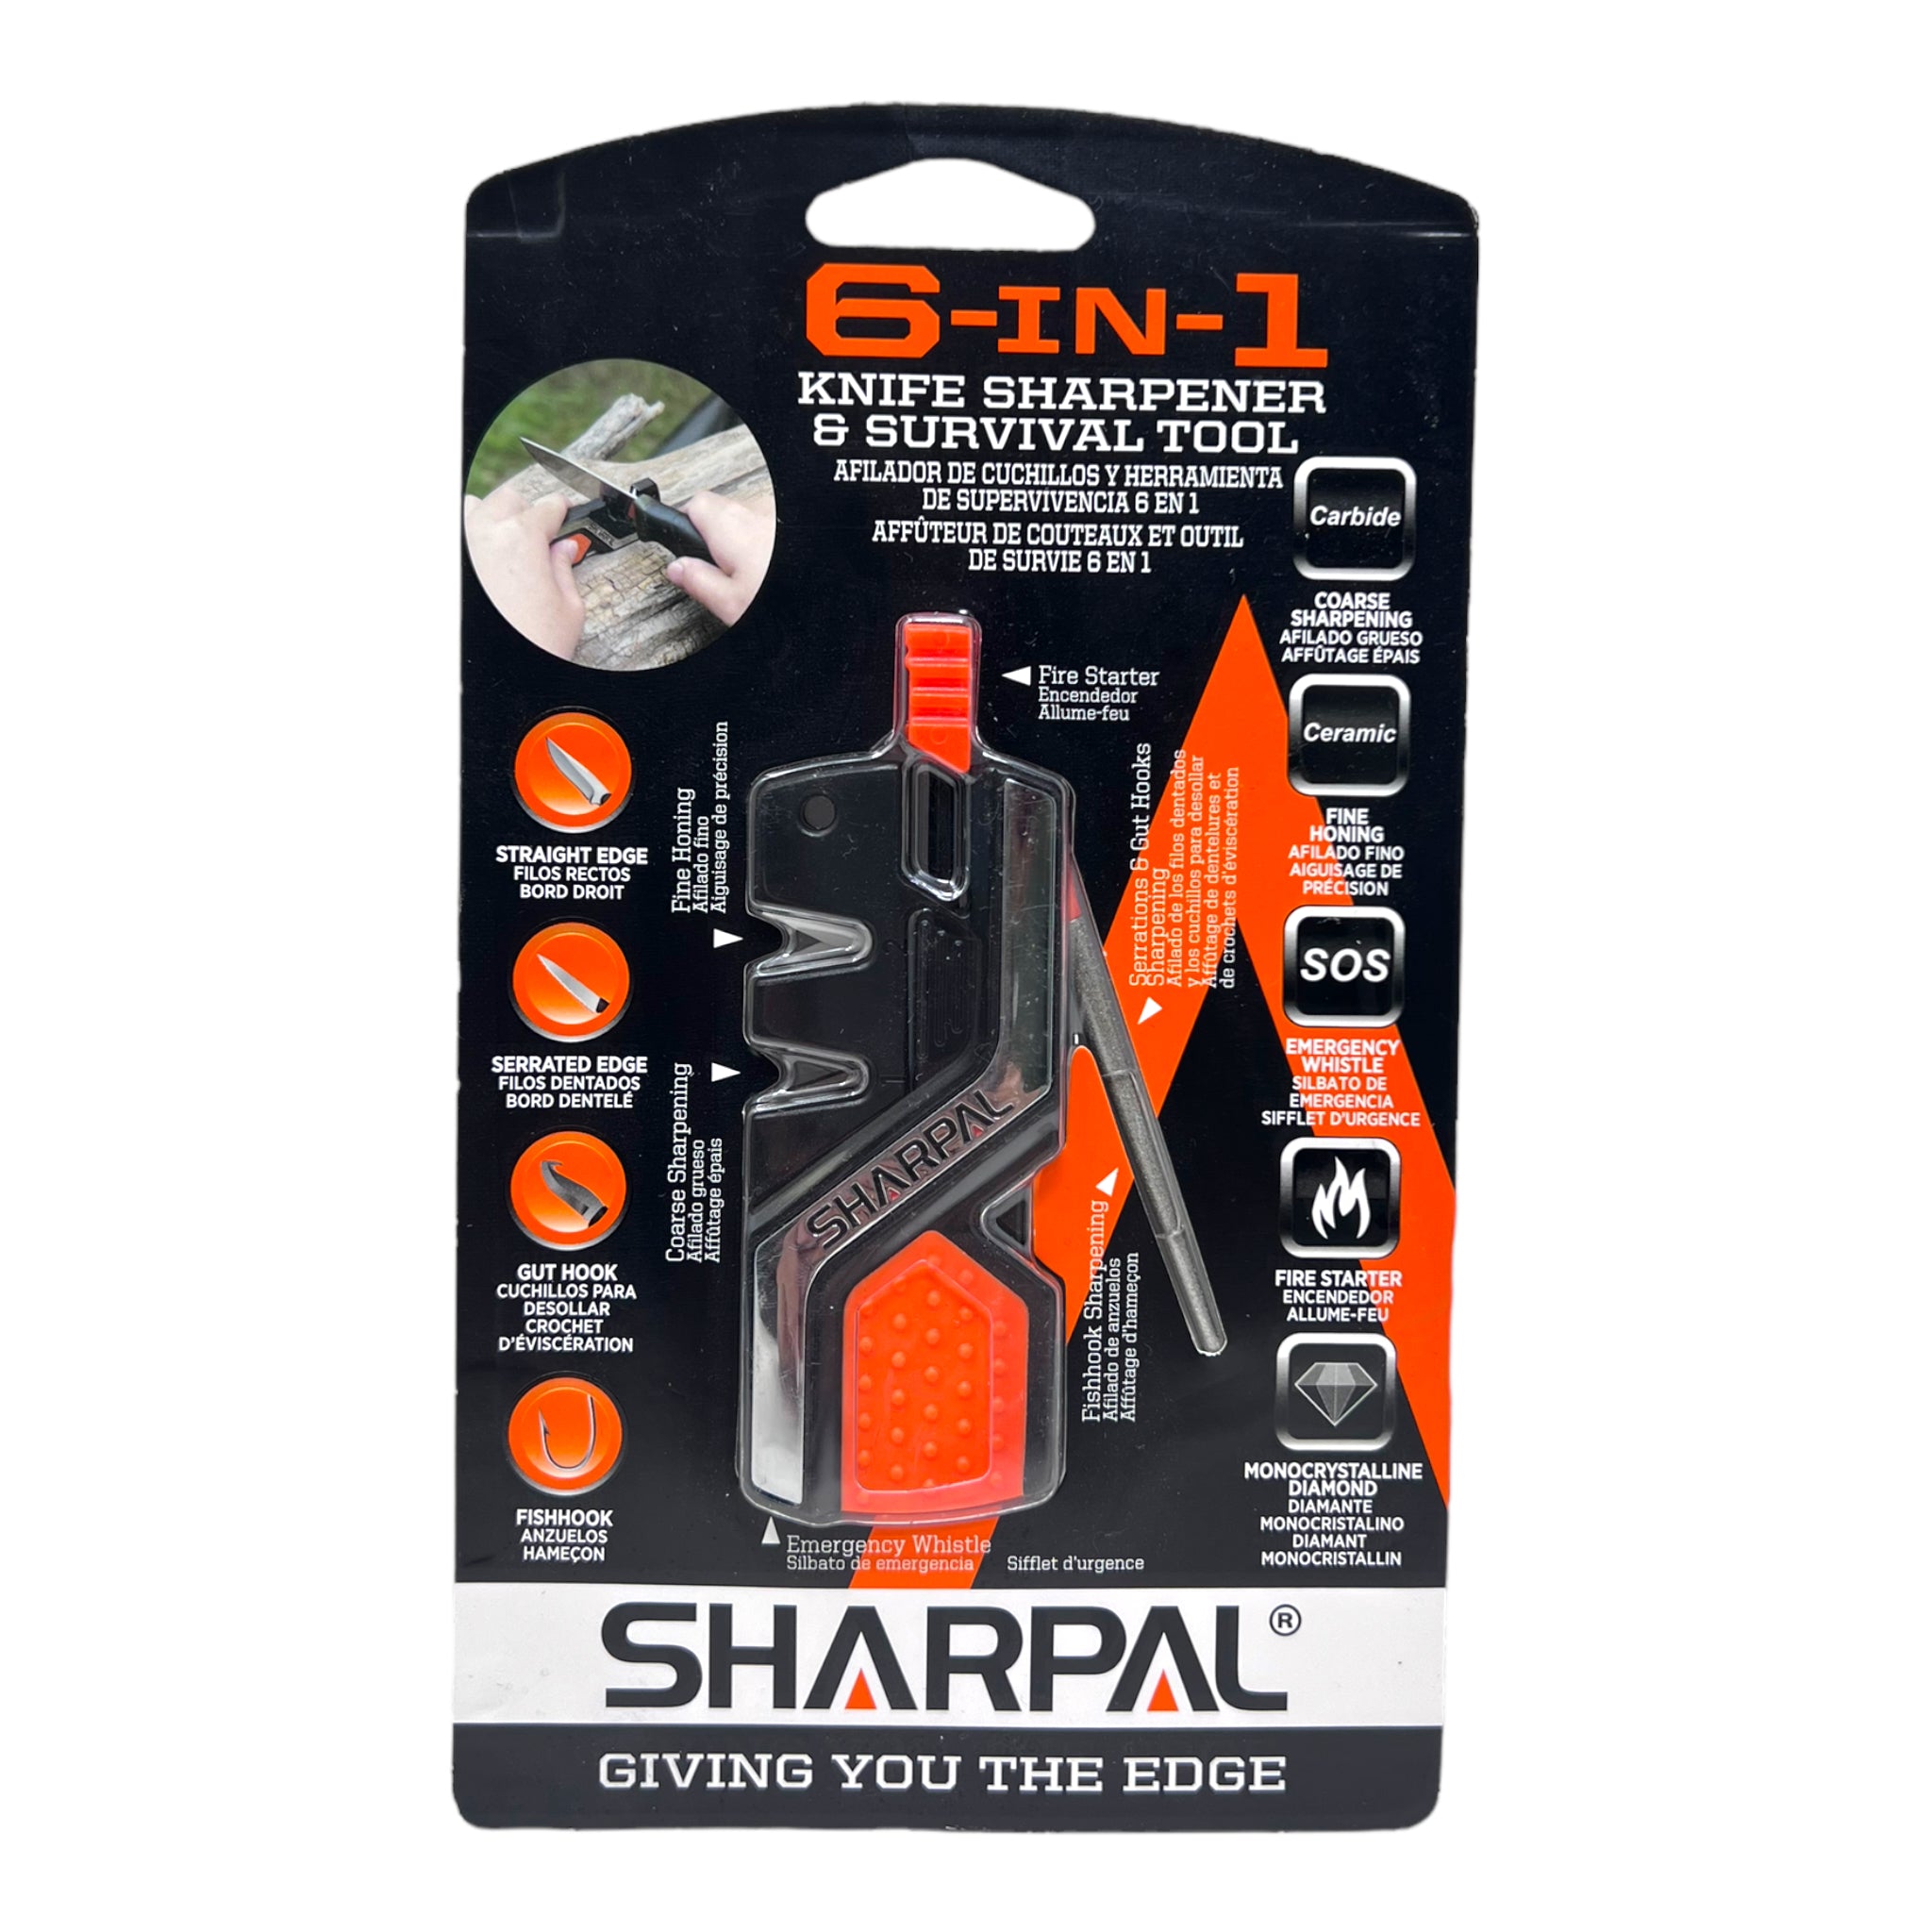 Sharpal 6-in-1